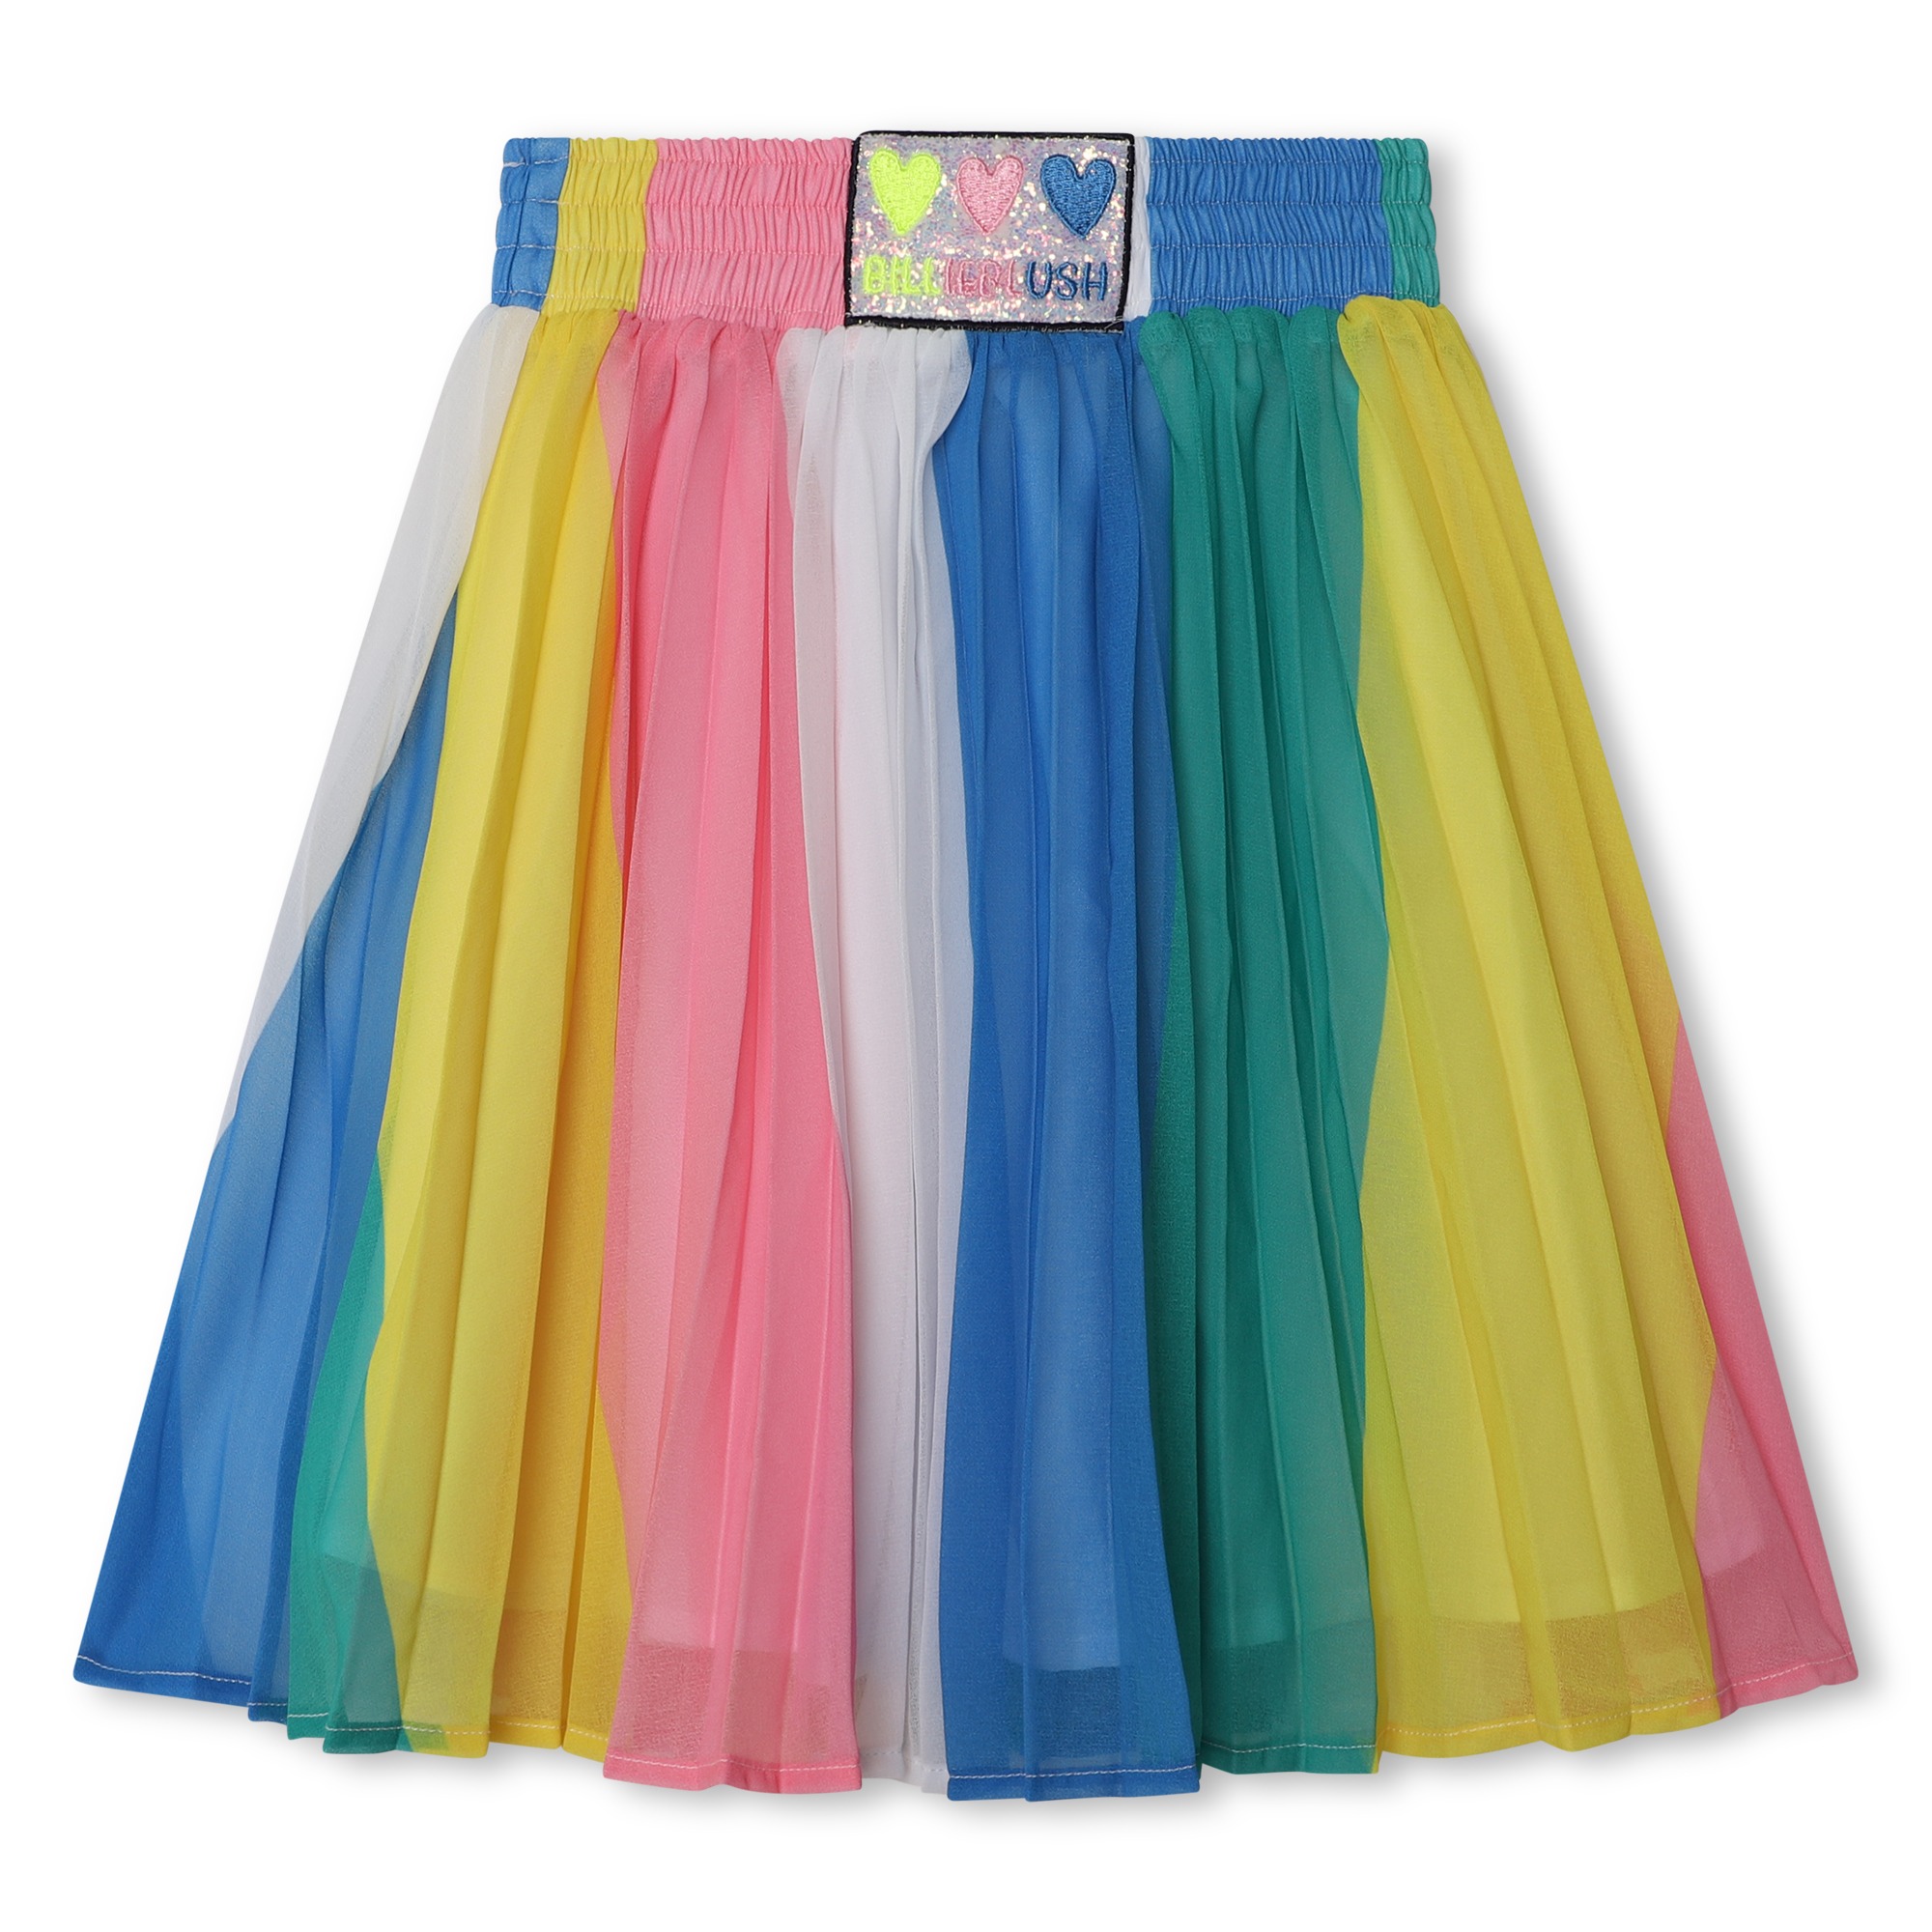 Pleated lined skirt